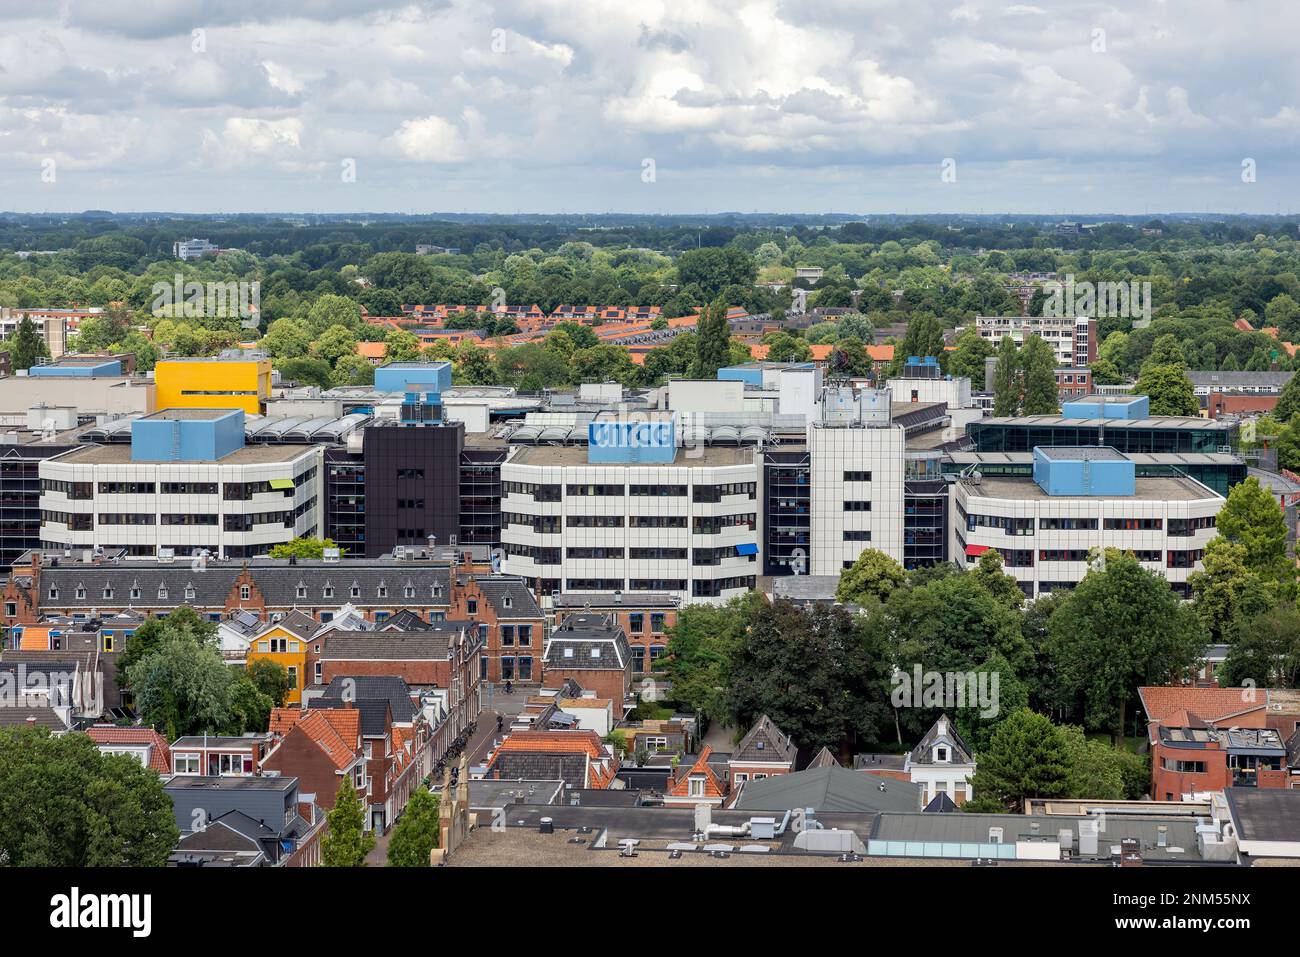 Skyline with aerial view rooftops and University Hospital - UMCG, University Medical Center Groningen - downtown Dutch medieval city Groningen Stock Photo